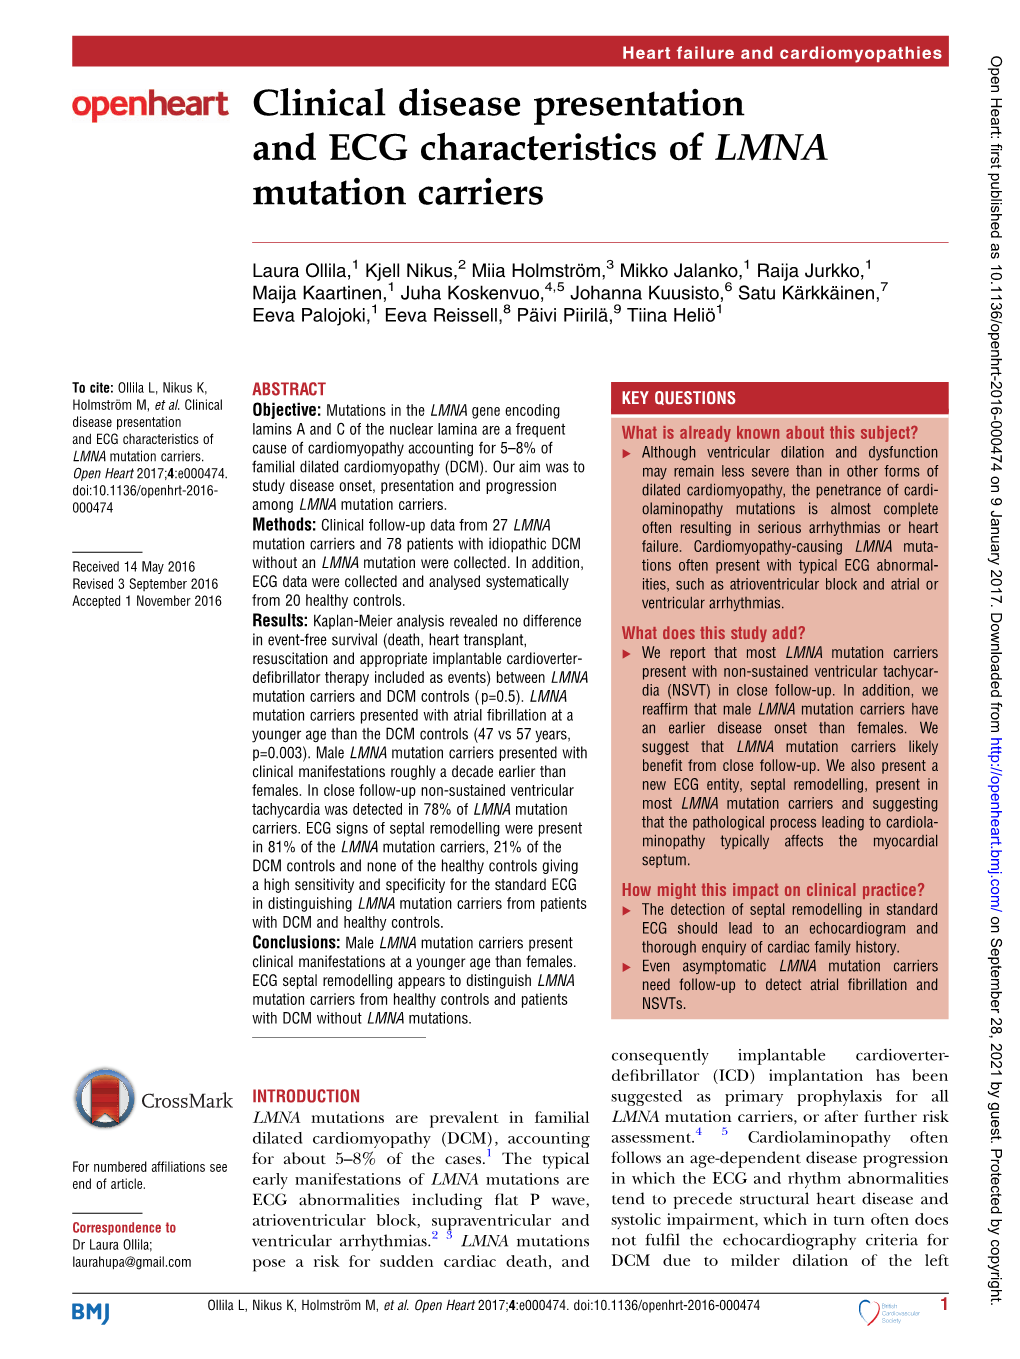 Clinical Disease Presentation and ECG Characteristics of LMNA Mutation Carriers